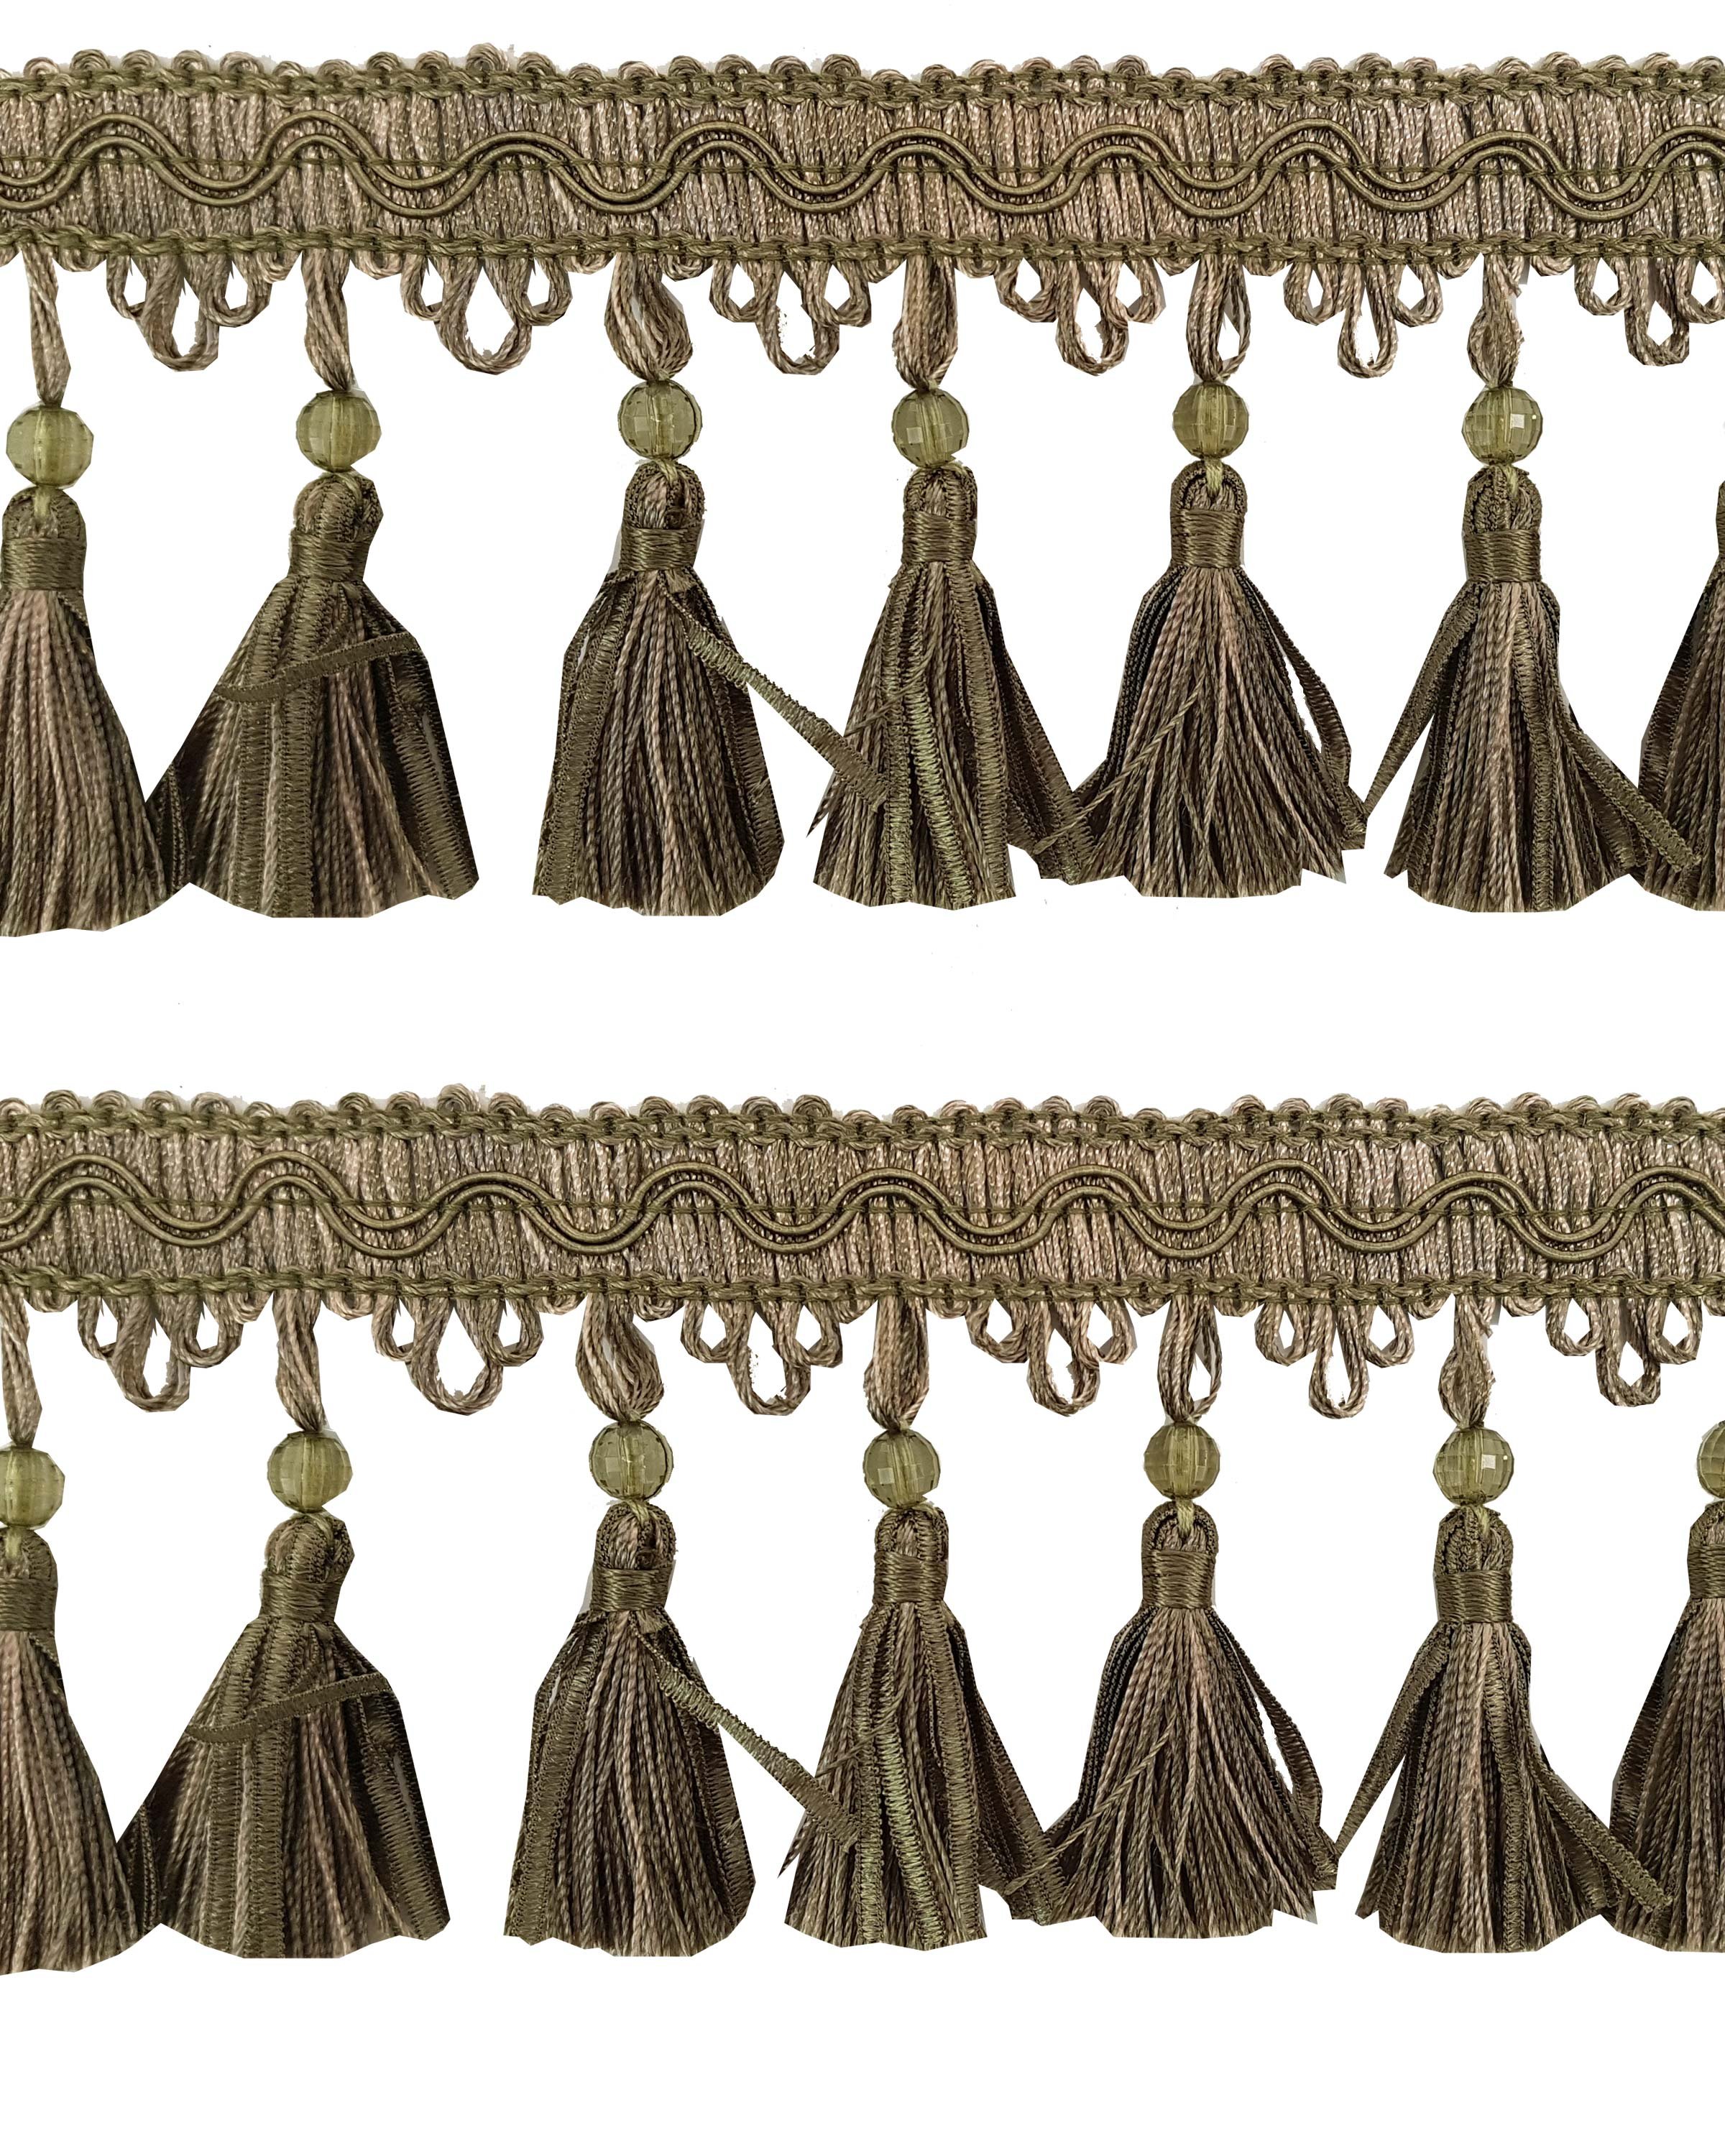 Fringe Tassels with Beads/Ribbons - Olive Green / Gold 90mm Price is per 5 metres